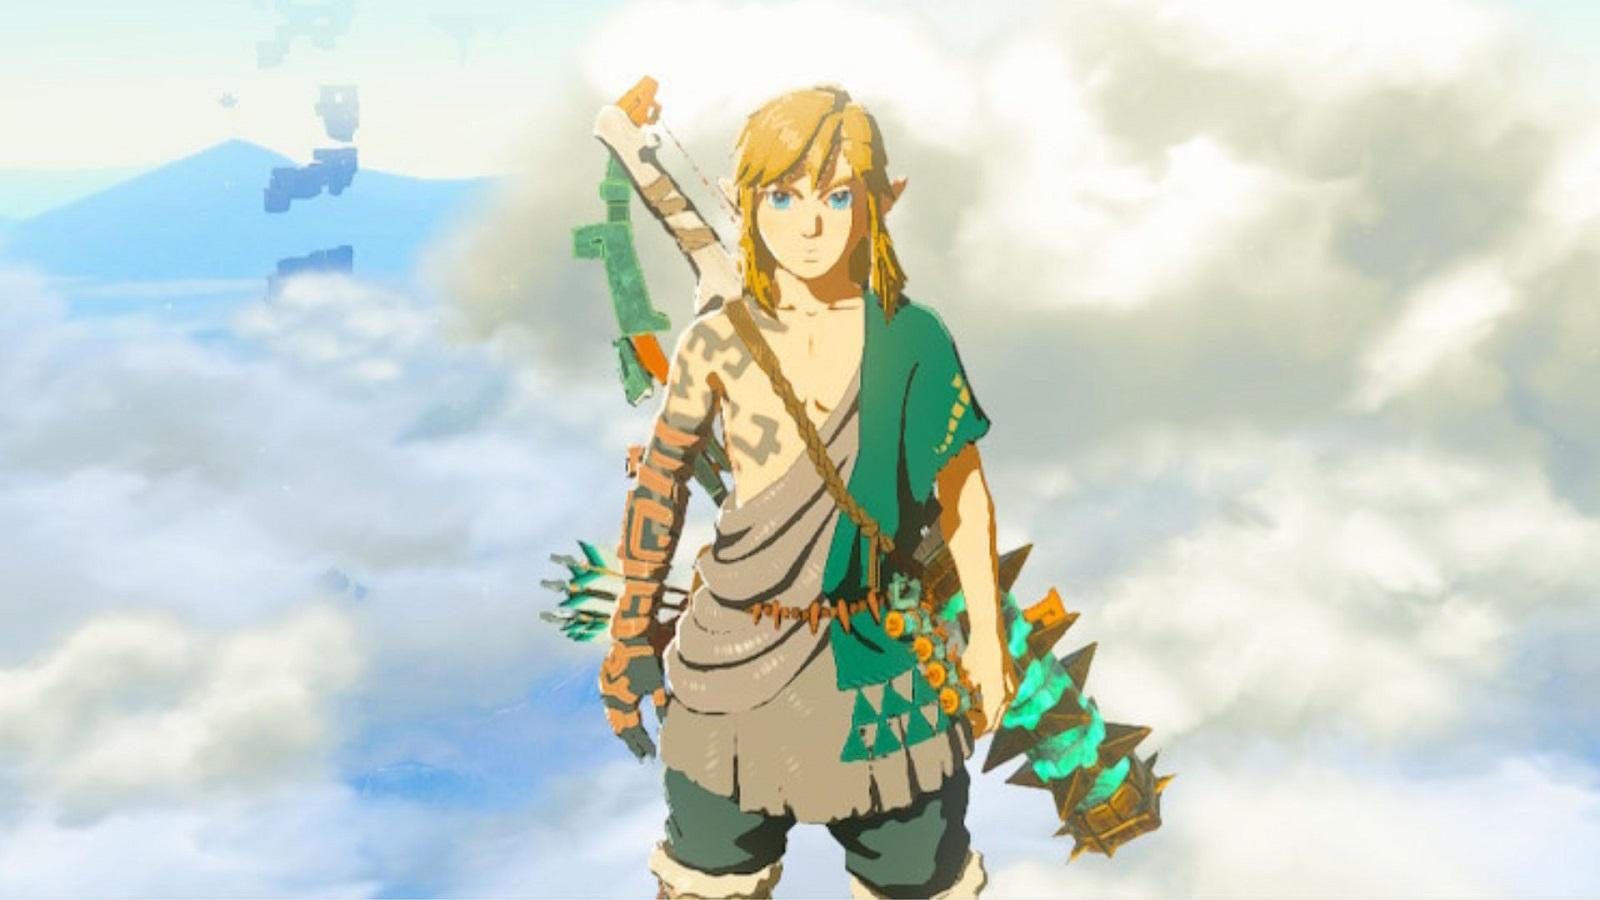 Breath of the Wild 2' release date could give Link this controversial weapon